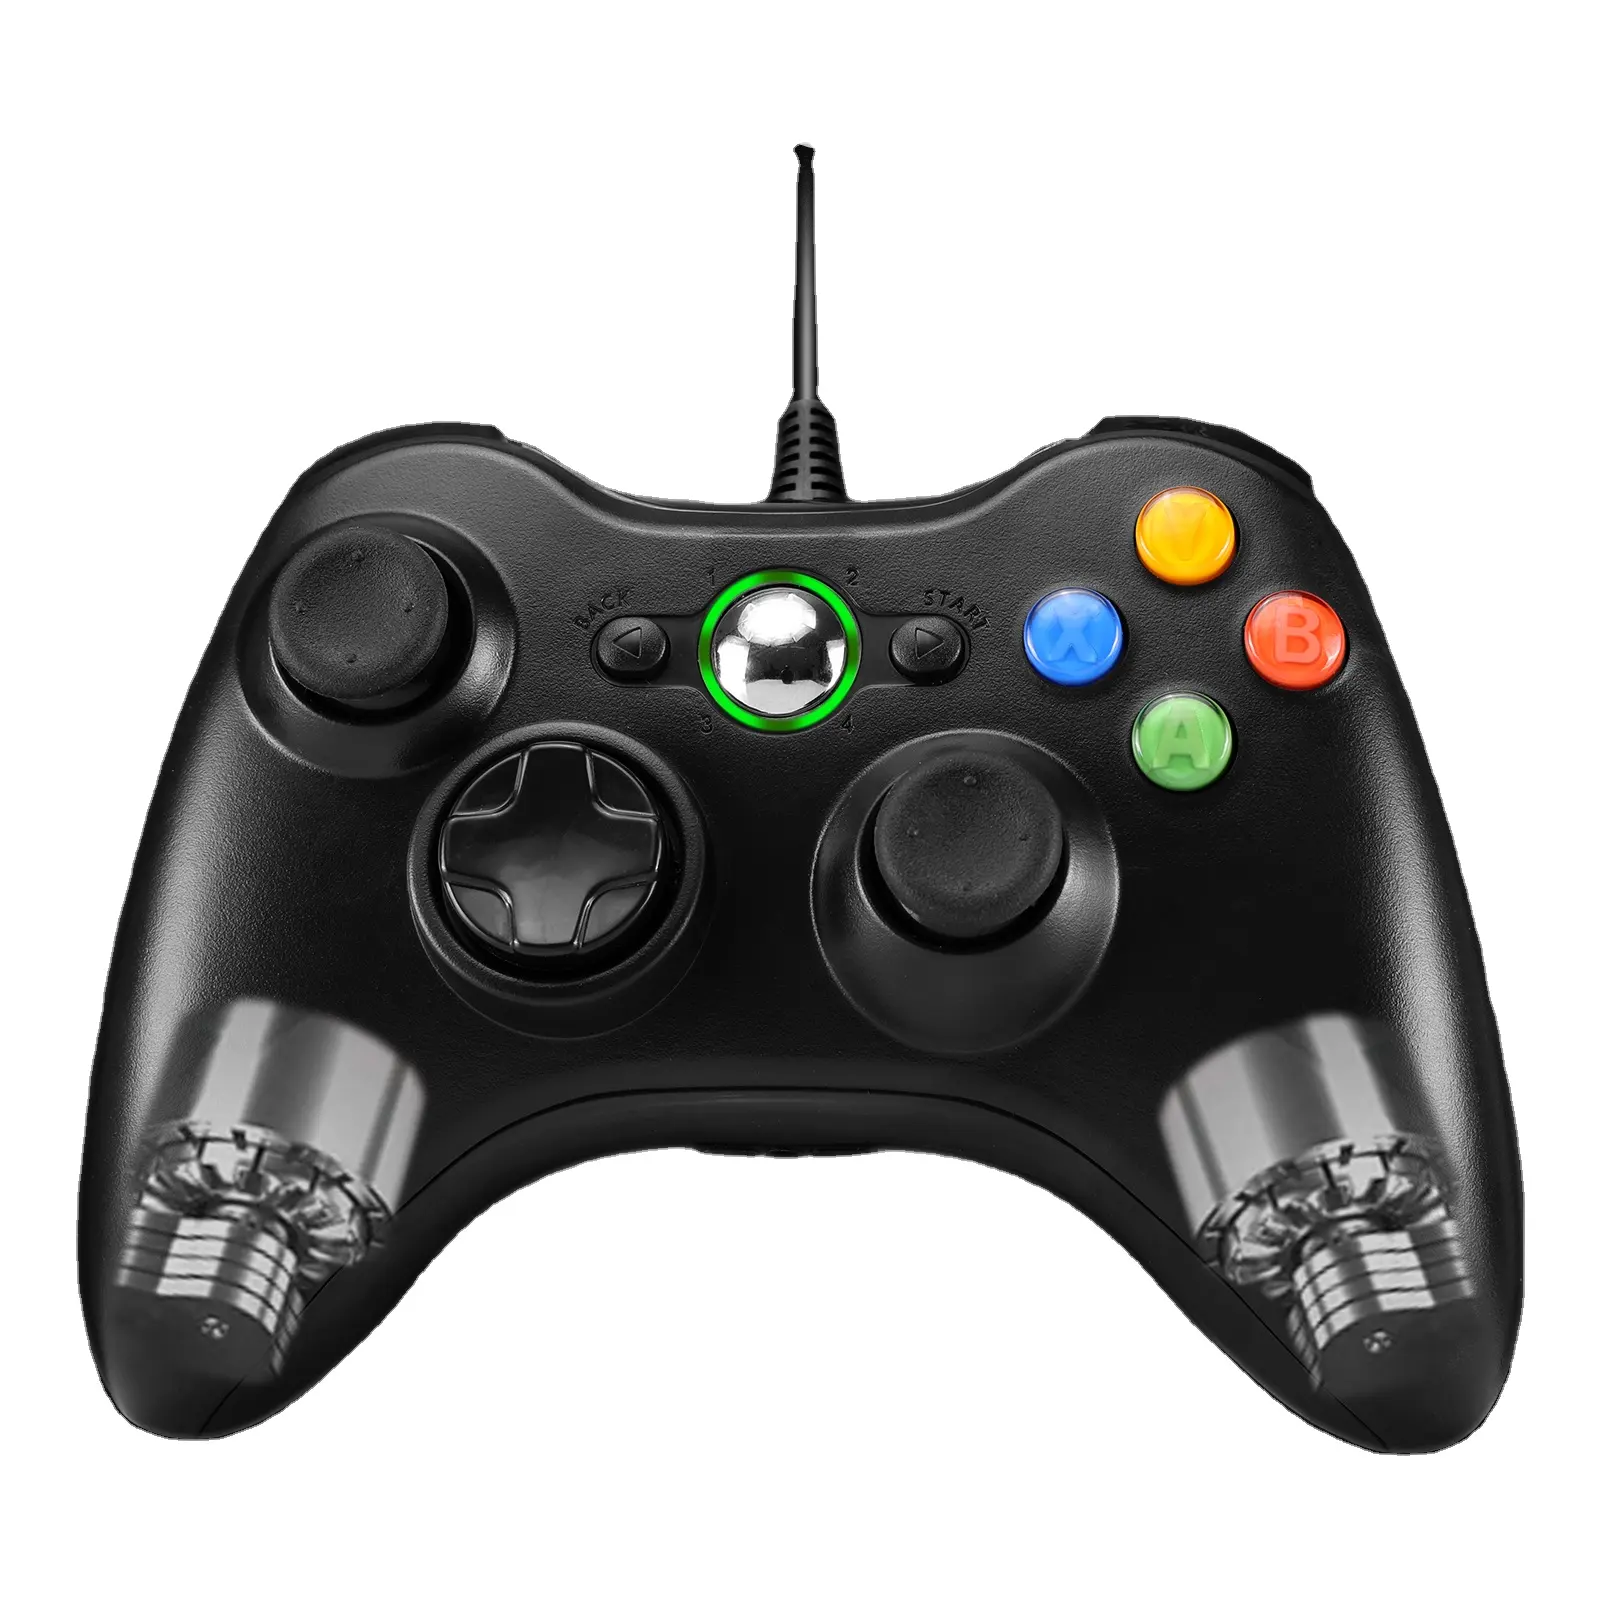 Gamepad For Microsoft Xbox 360 Controller Wired Joystick Joy Pad USB Game Pad Control Xbox 360 Controller And PC